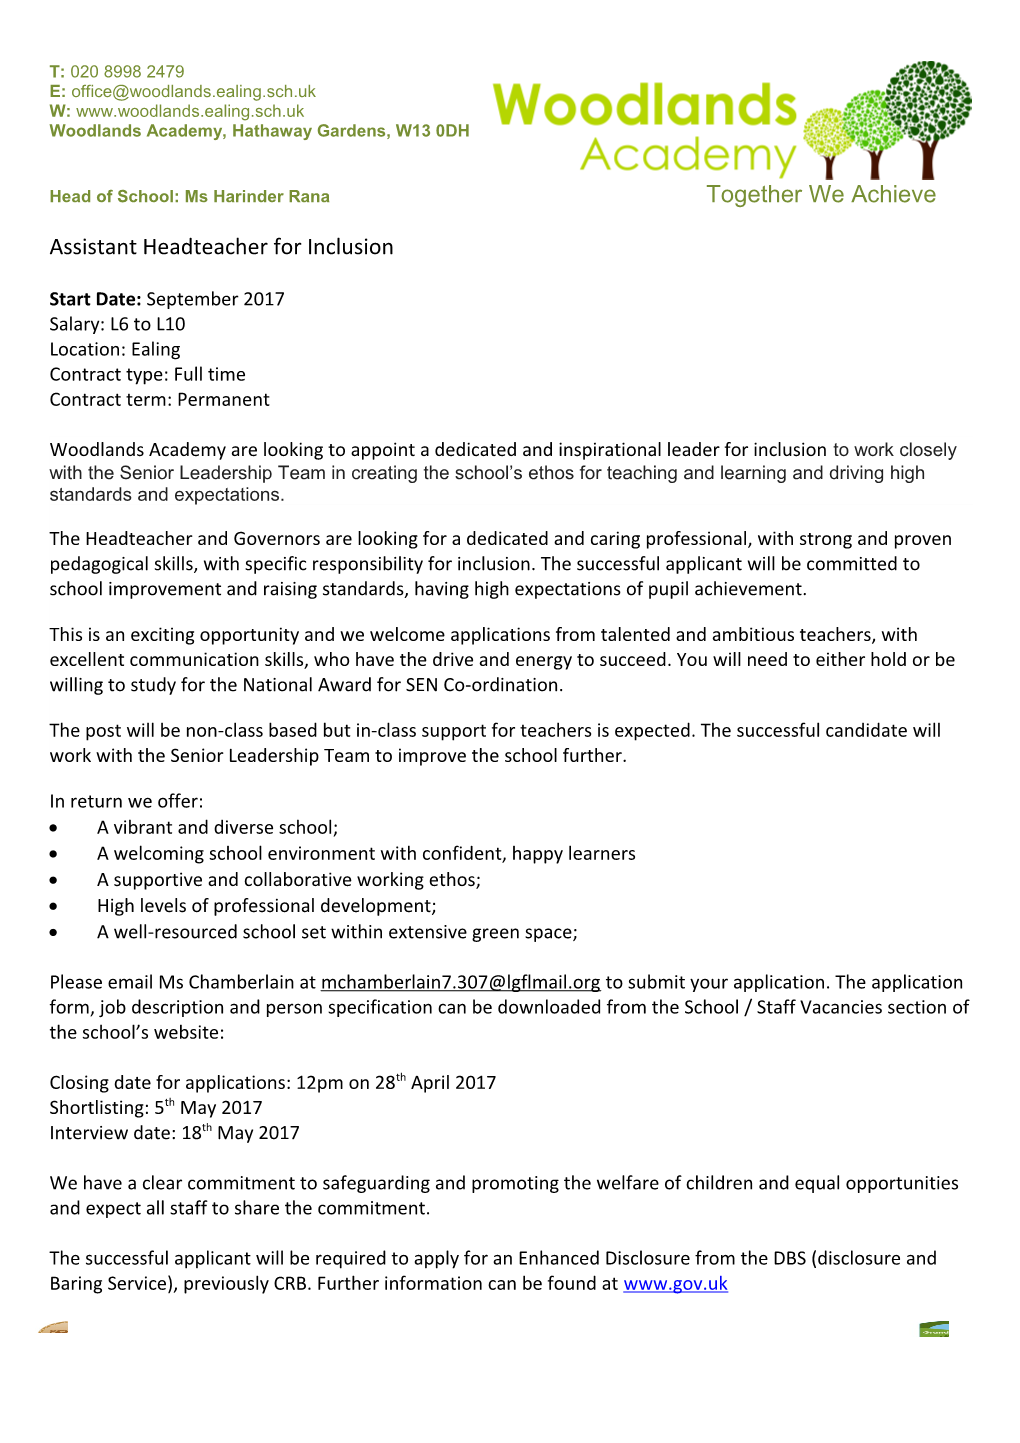 Assistant Headteacher for Inclusion